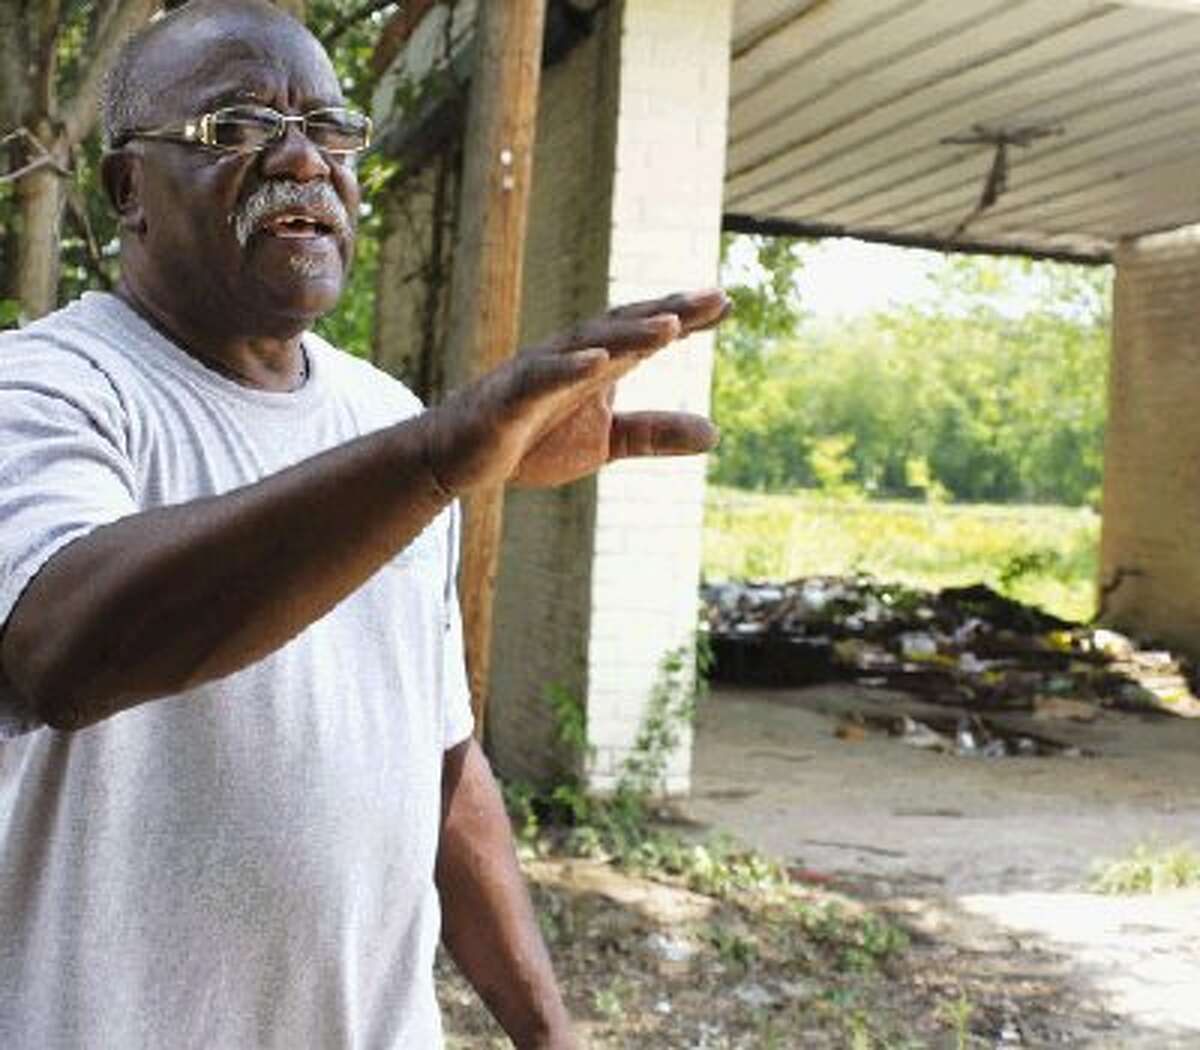 Tommy Johnson discovered Elkins’ vehicle at an abandoned car wash on Homestead Road July 25.